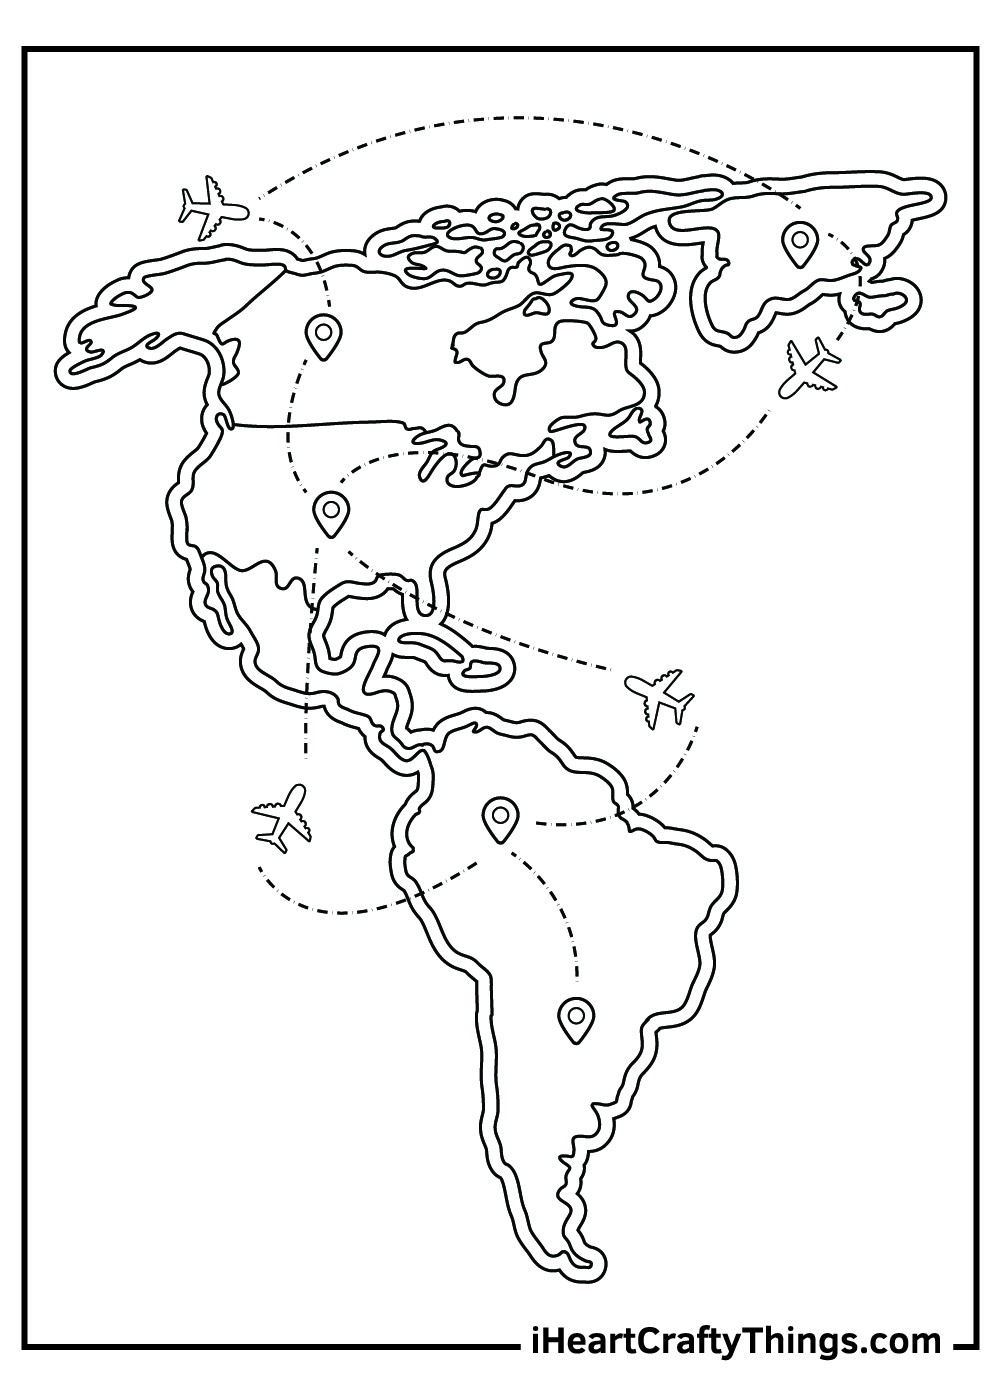 world map coloring pages free download